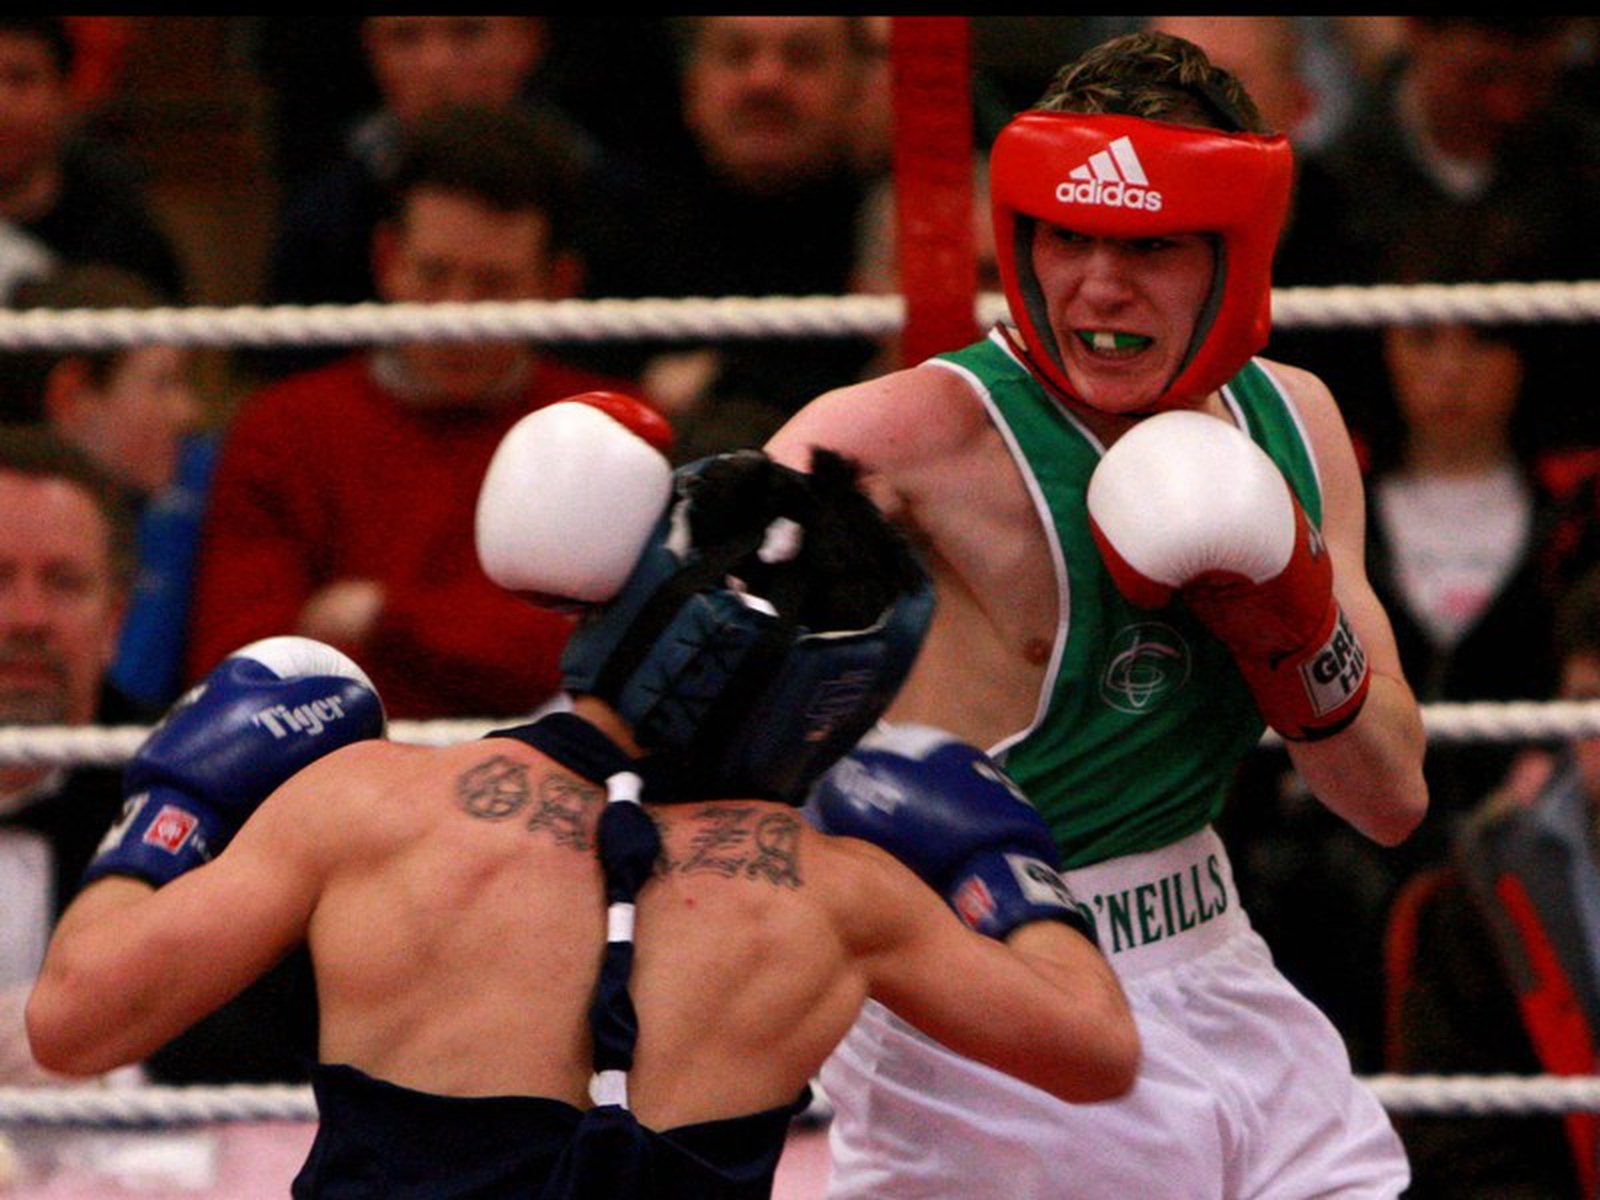 Further success for Irish boxers